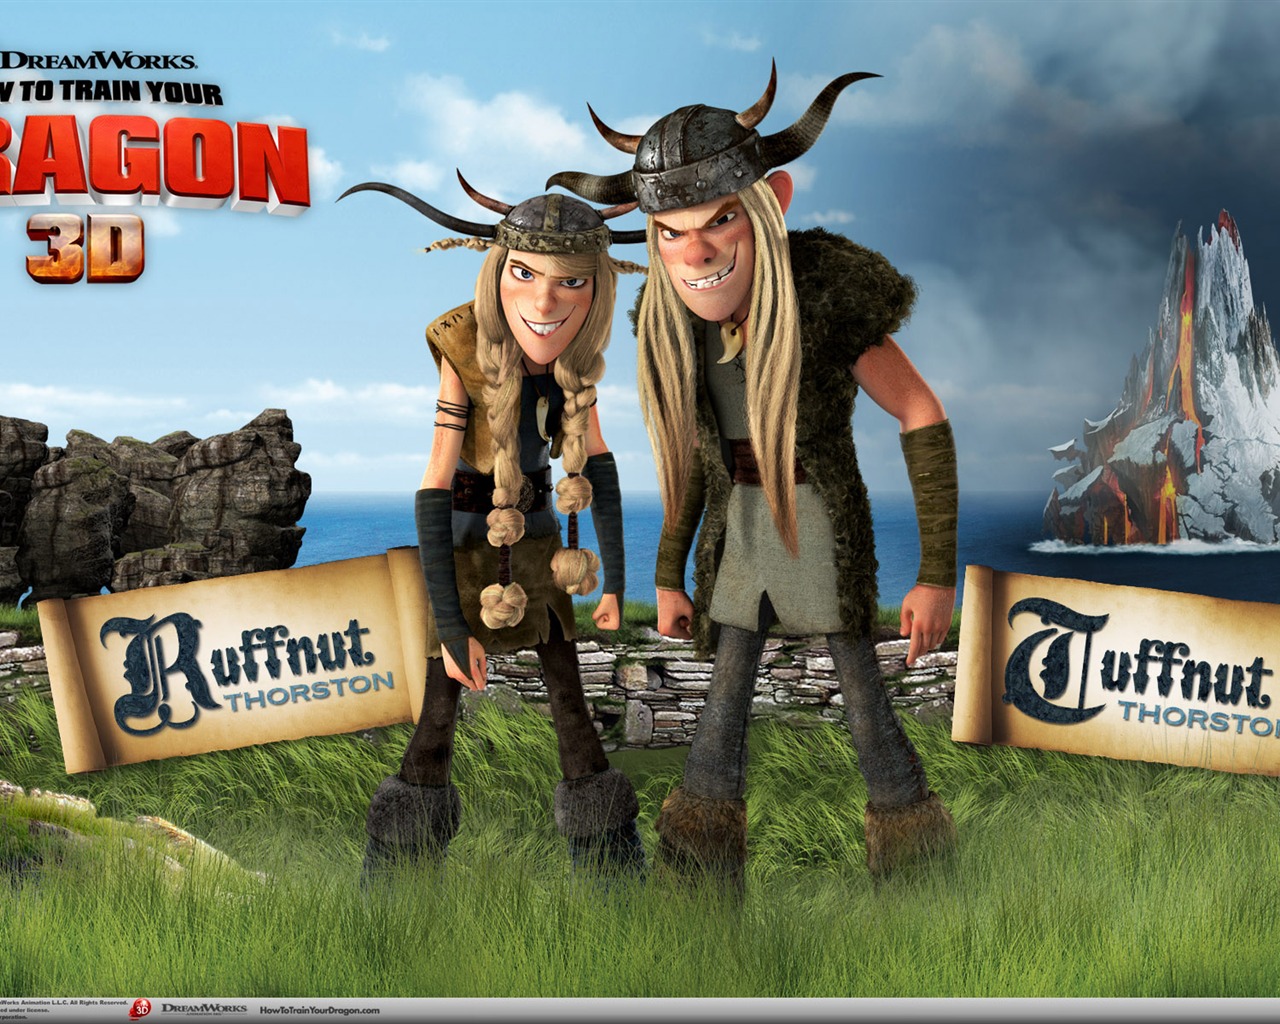 How to Train Your Dragon HD wallpaper #20 - 1280x1024